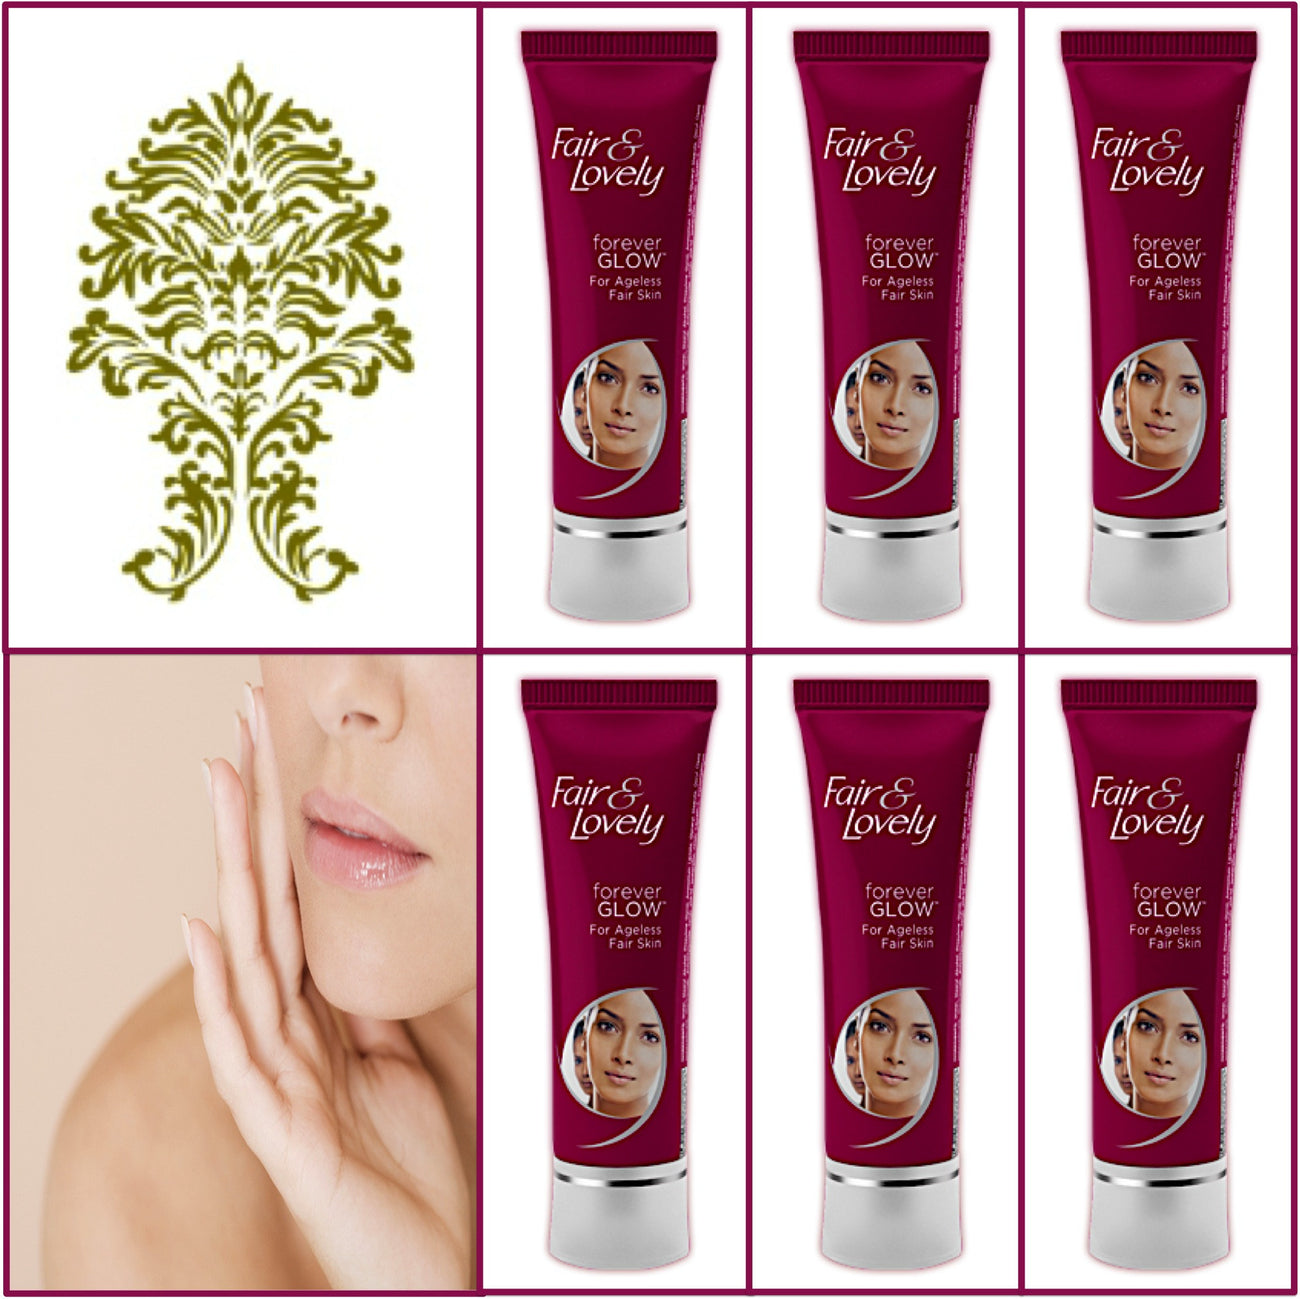 6 Pack Fair & Lovely Forever Glow Cream - Younger Looking Skin 50g Each